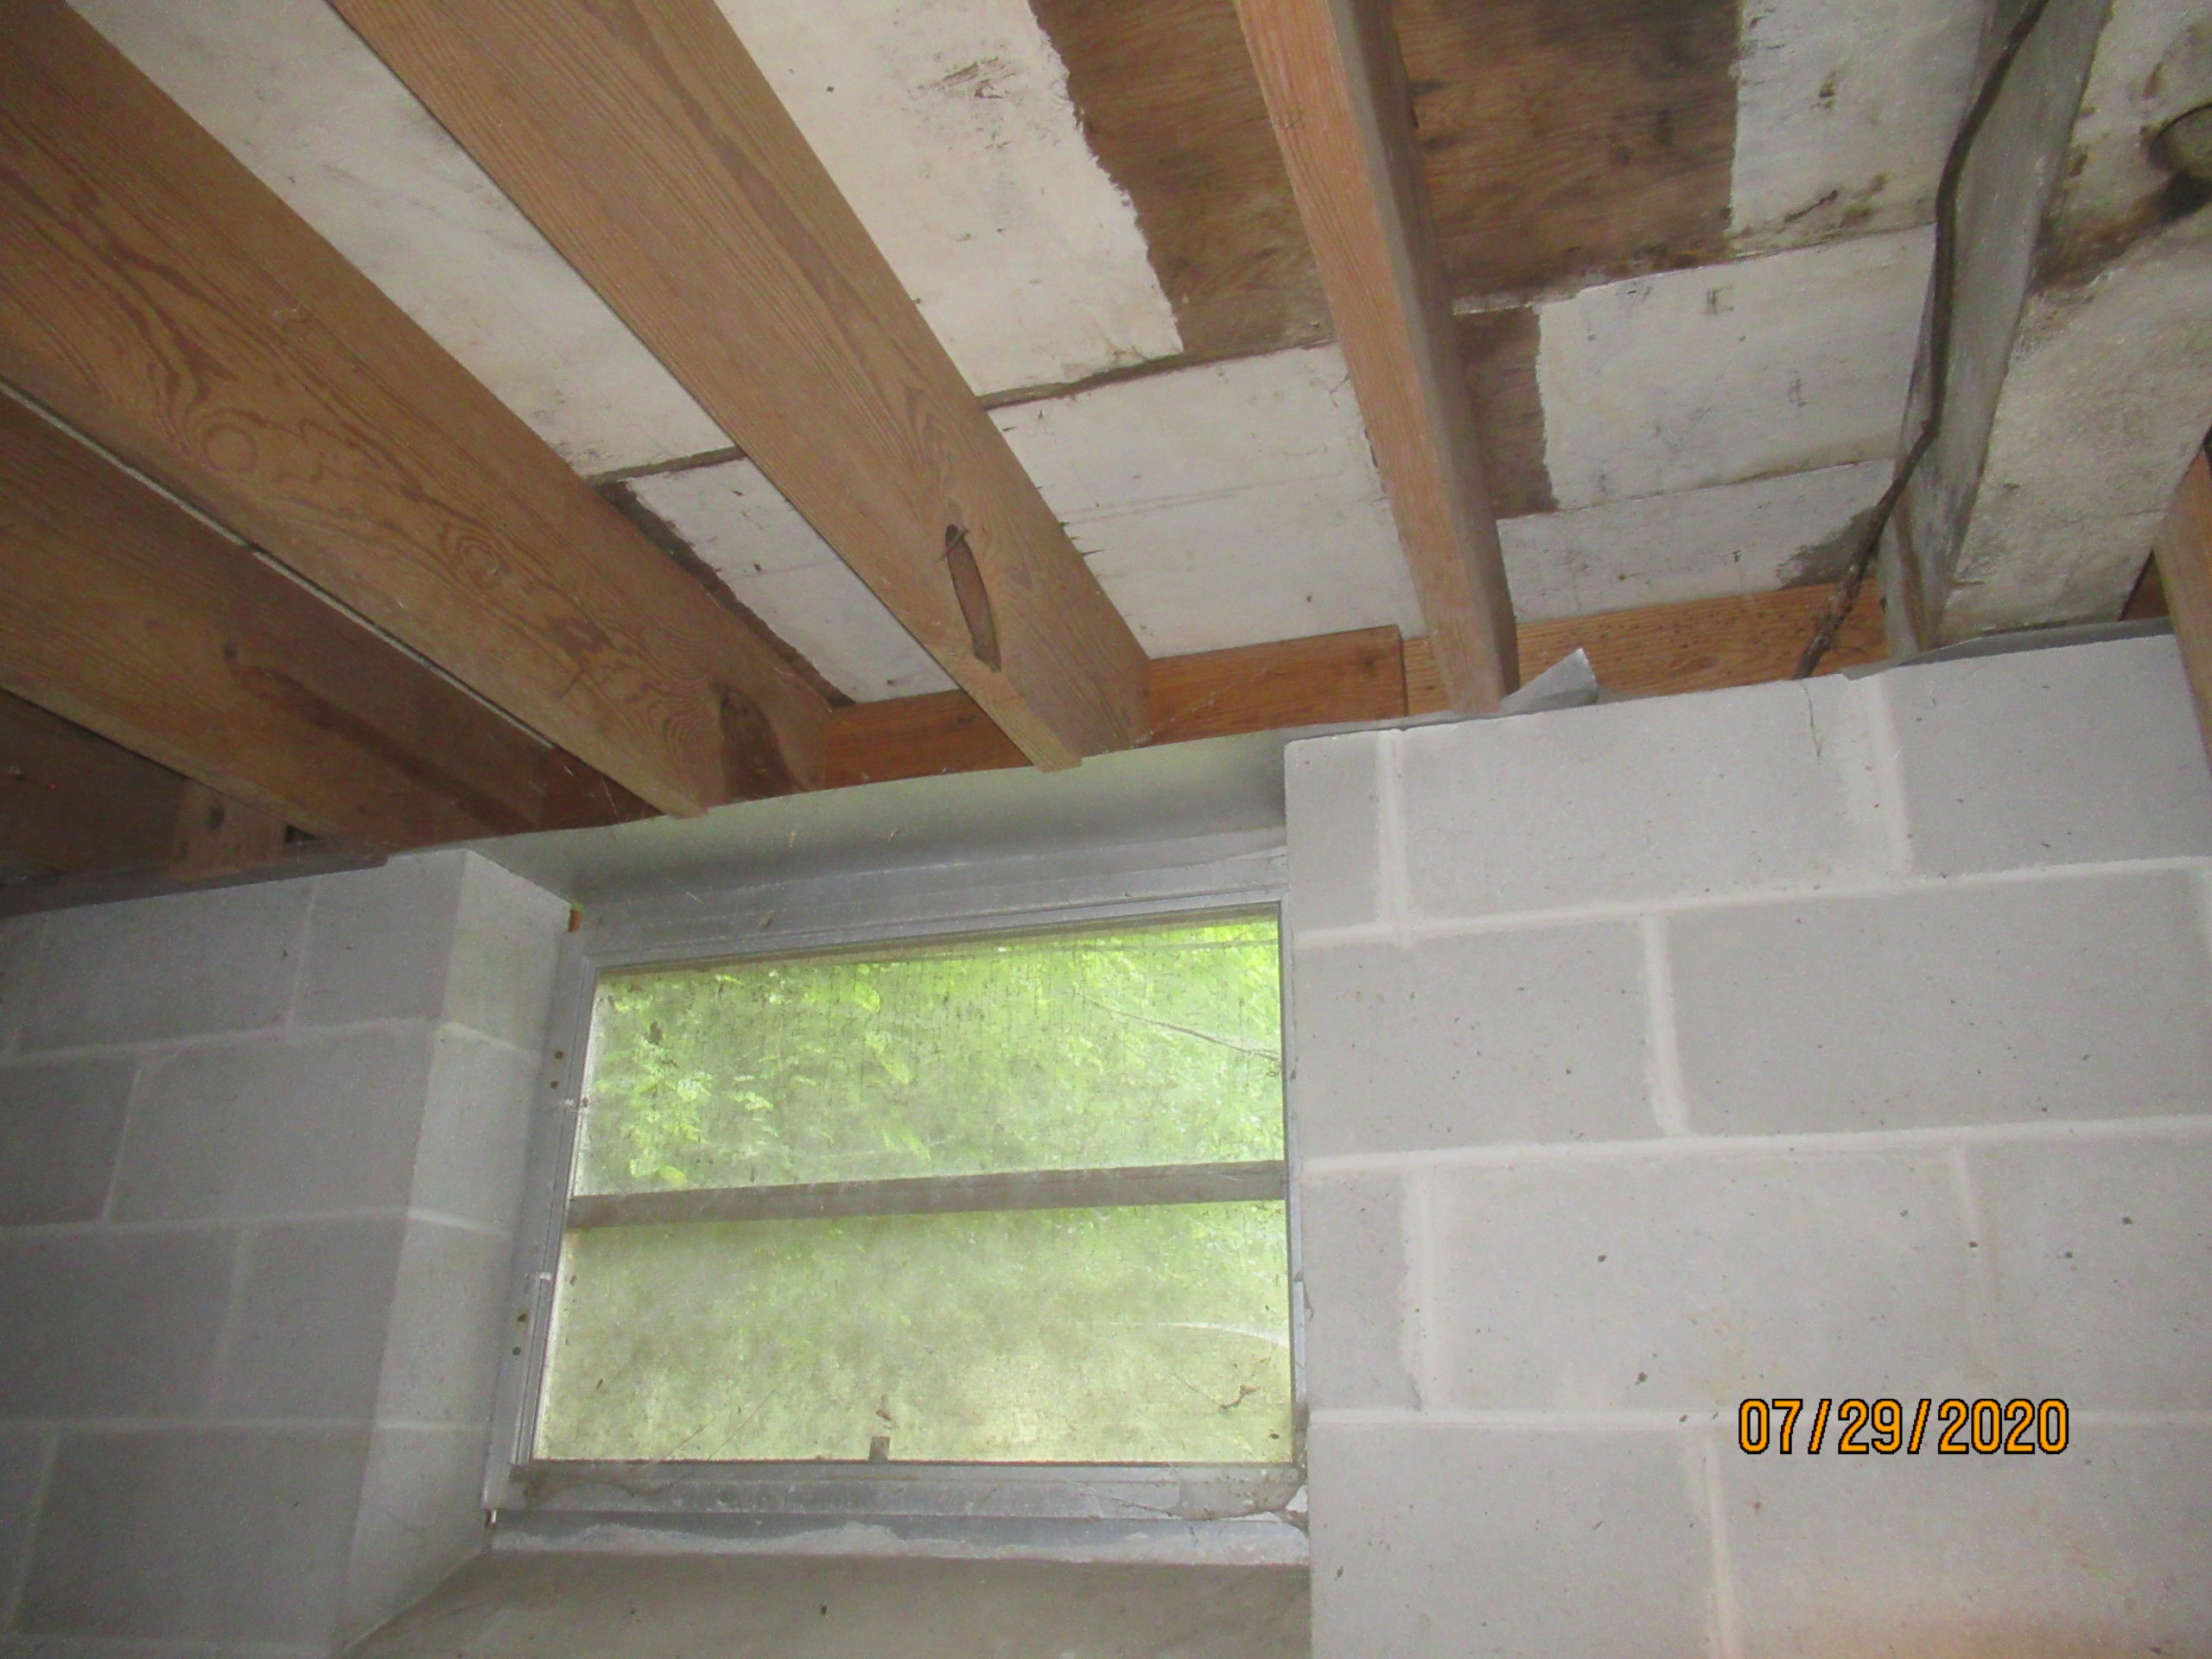 Improperly supported floor joists